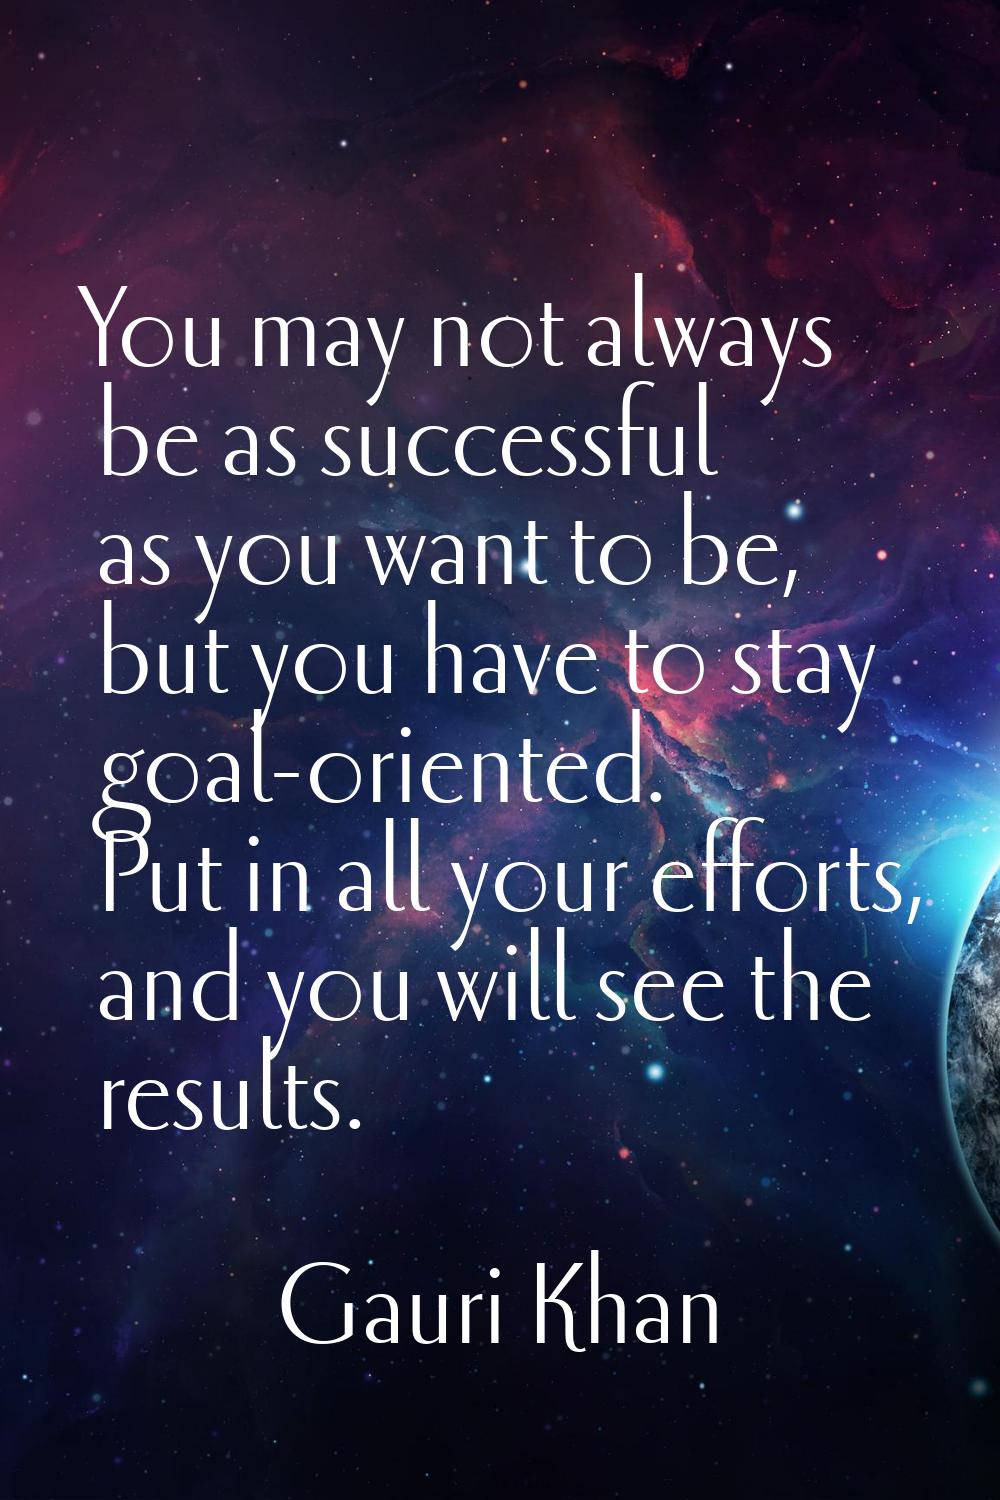 You may not always be as successful as you want to be, but you have to stay goal-oriented. Put in a